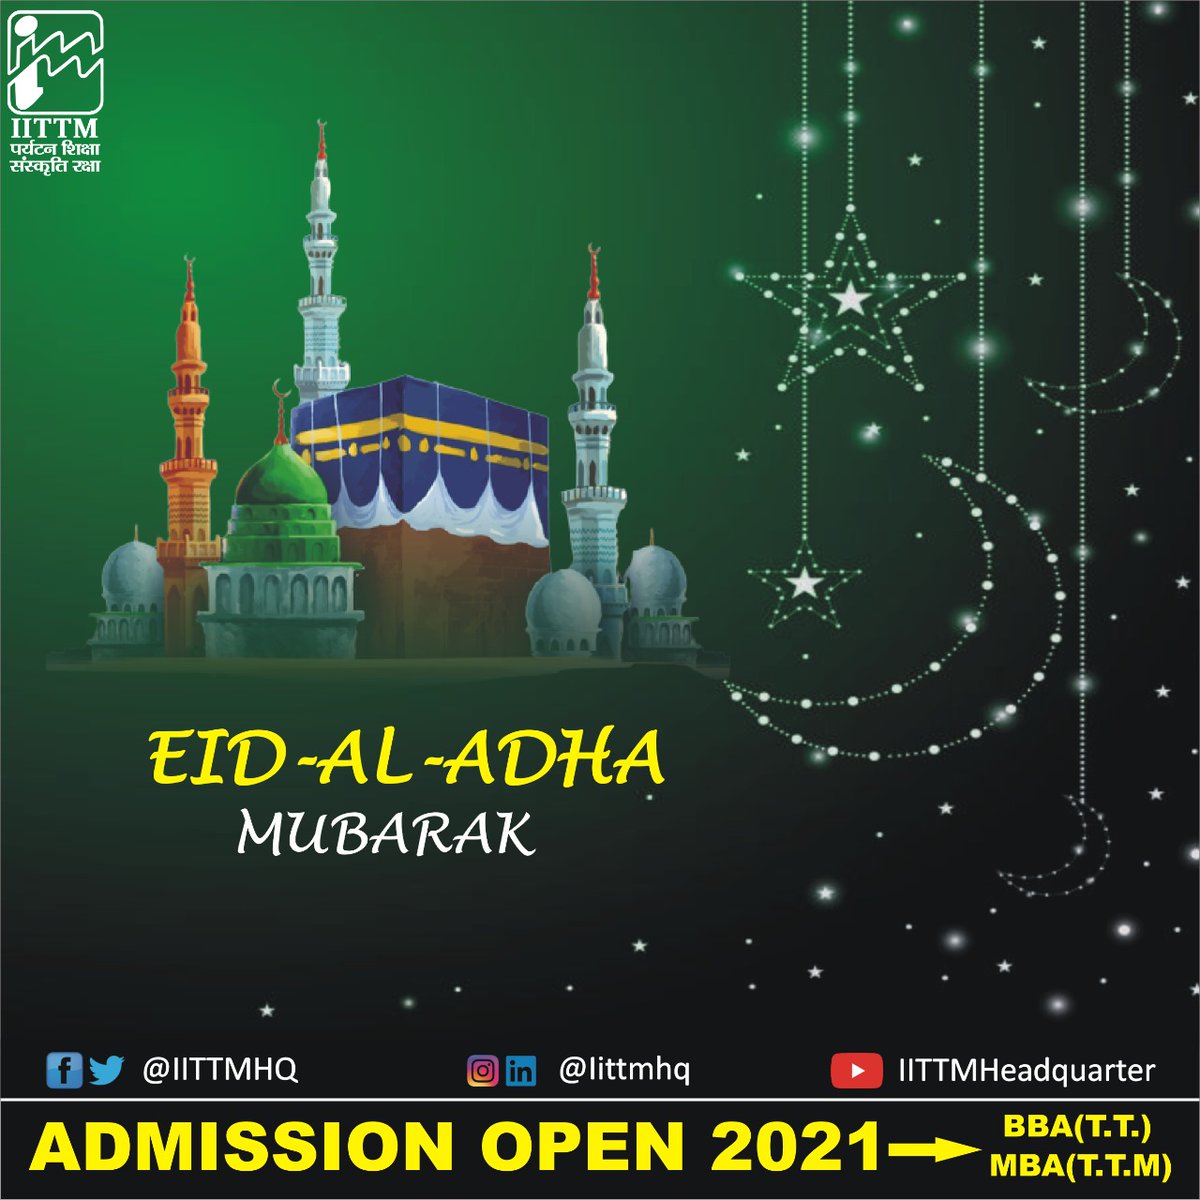 Warm greetings and good wishes on the occasion of Eid al-Adha. May this day bring happiness and harmony in our society. 
#EidMubarak

You can apply for admission in #IITTM till 31st July 2021.
Visit iittm.ac.in

#WorldofTourism #TourismAndHospitality #TourismEducation